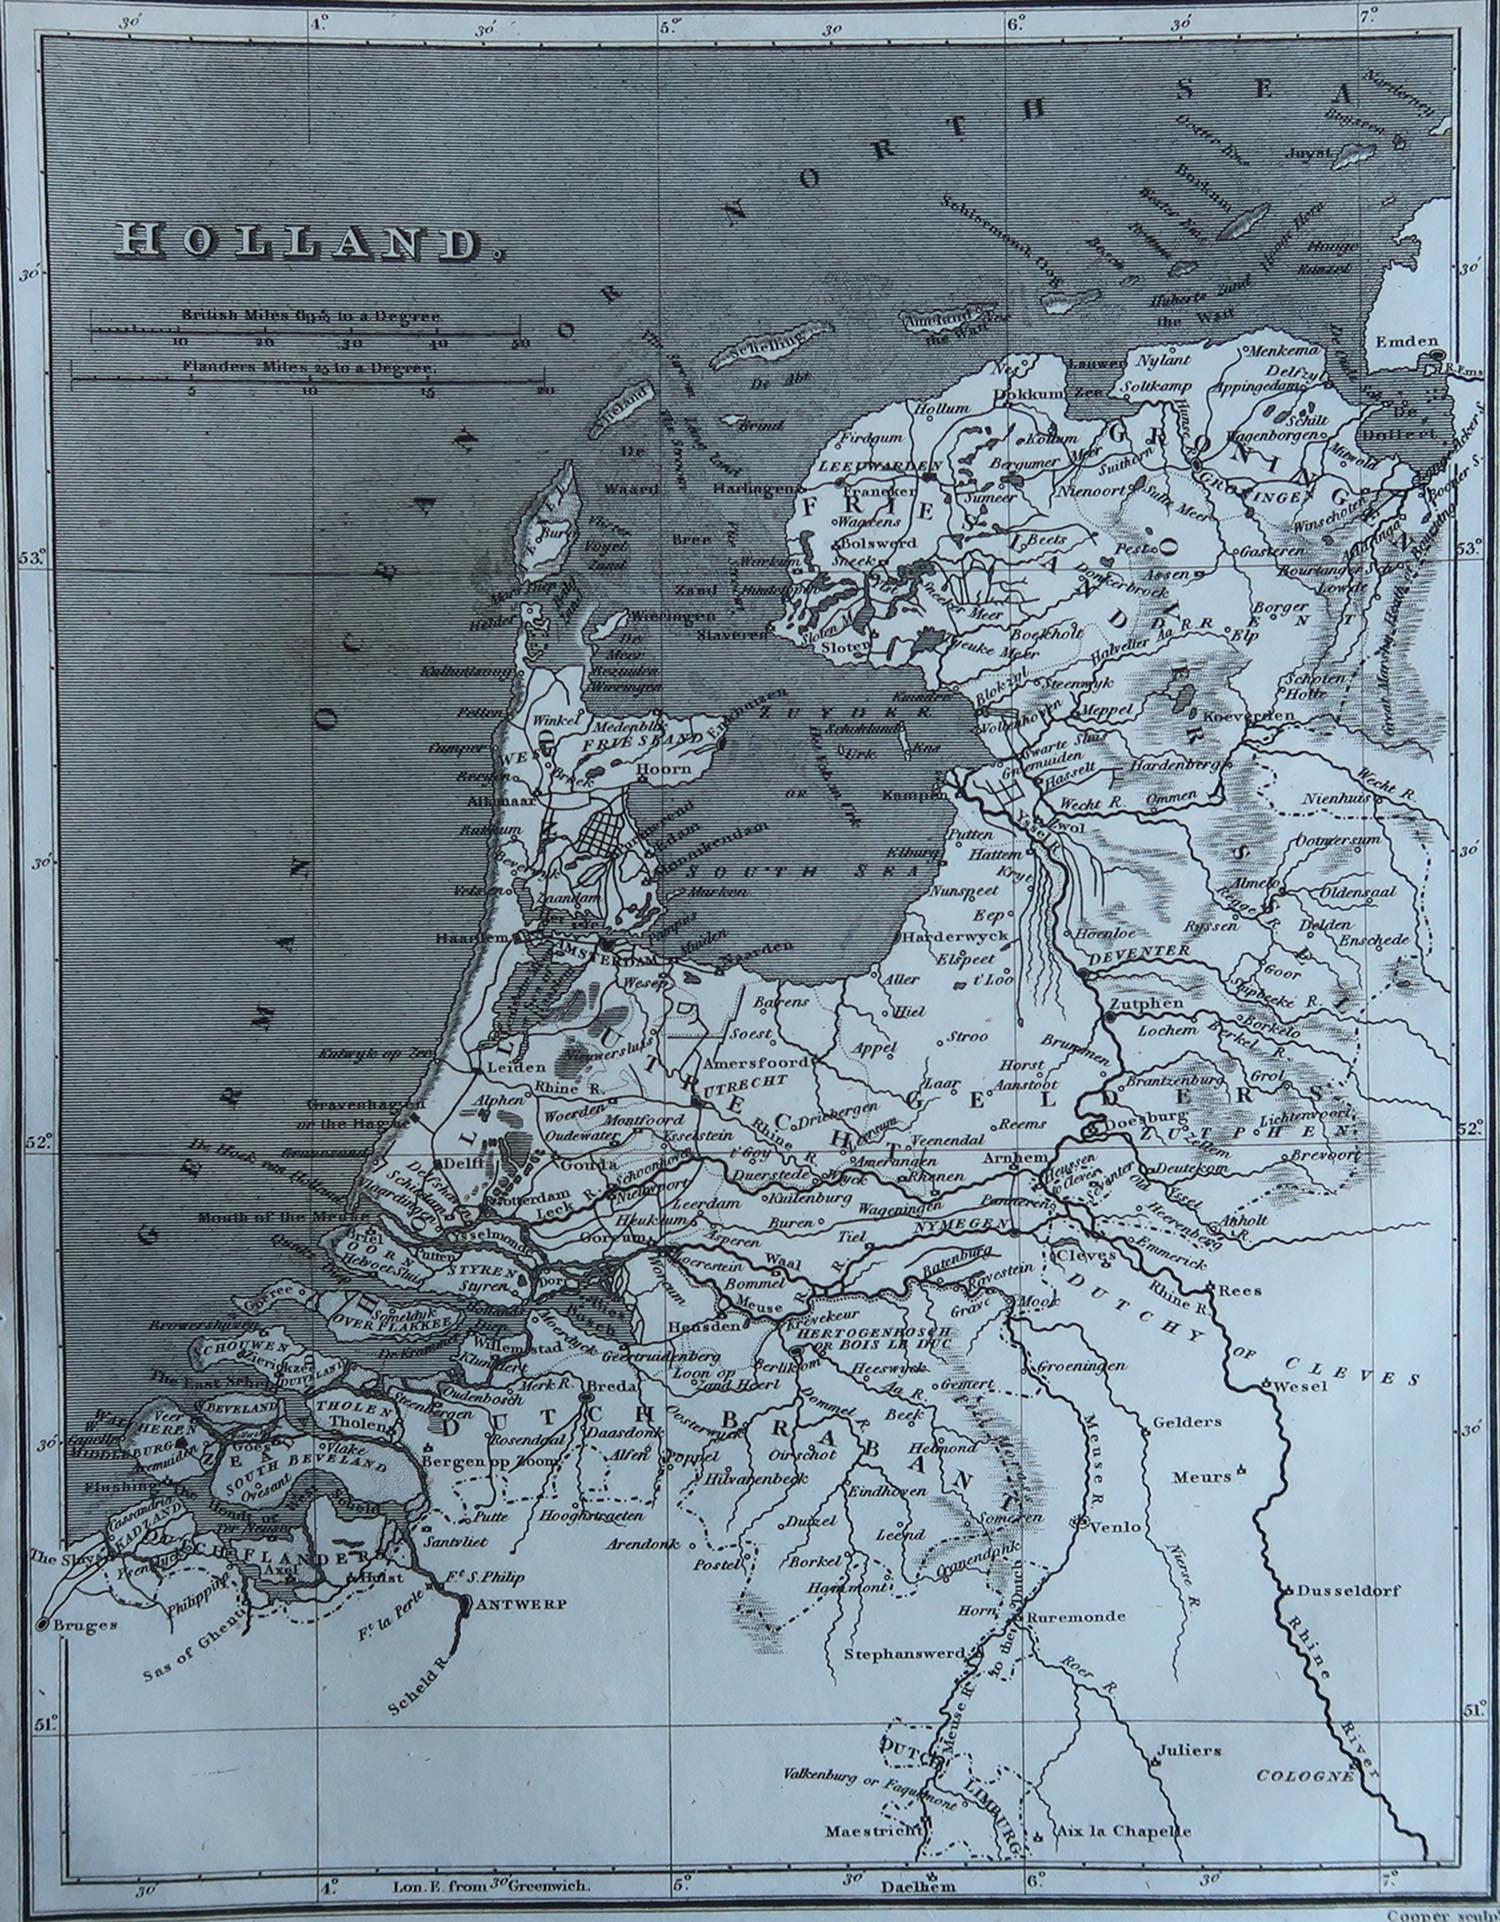 Great map of The Netherlands

Copper-plate engraving by Cooper

Published by Sherwood, Neely & Jones.

Dated 1809

Unframed.